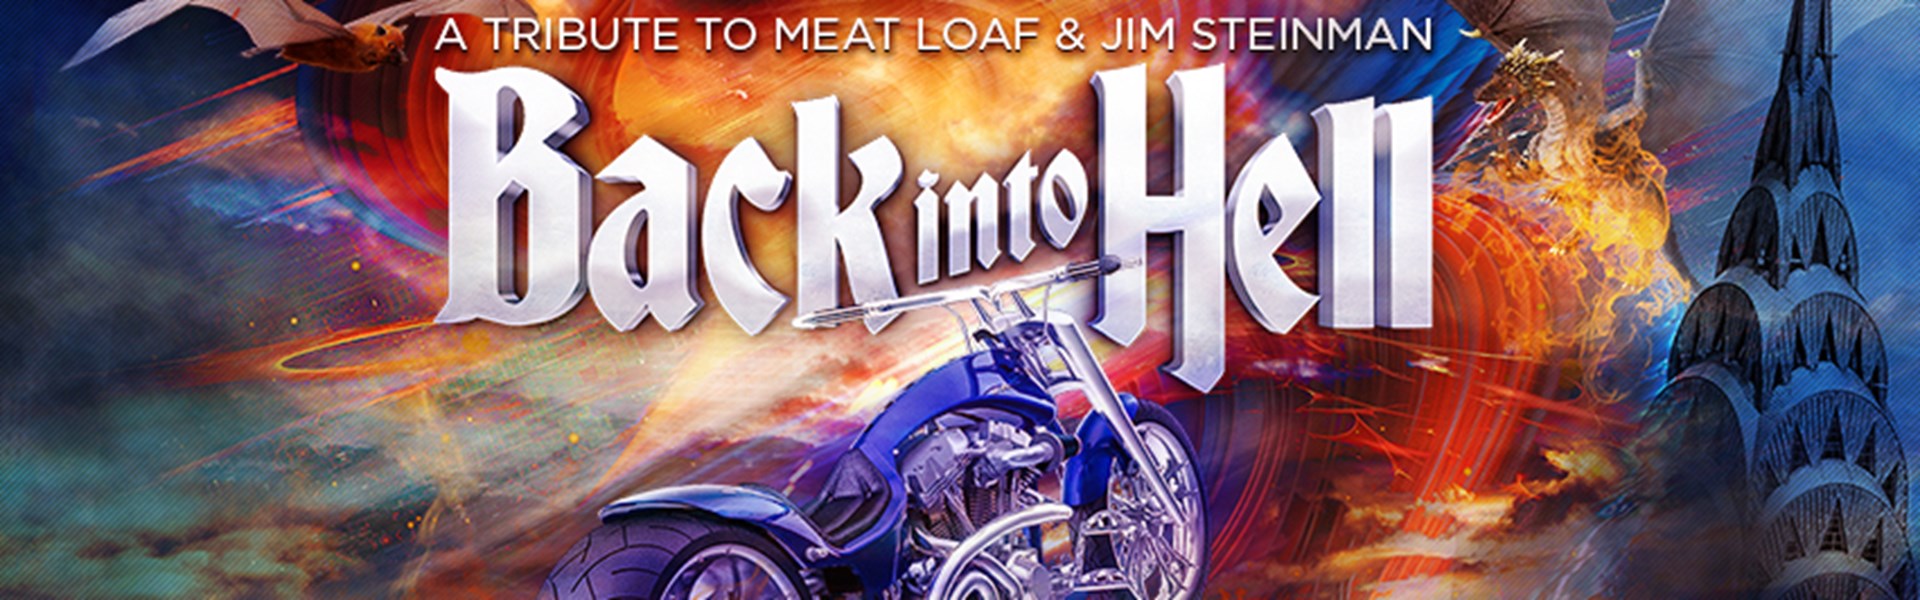 Back Into Hell: A Tribute to Meatloaf & Jim Steinman